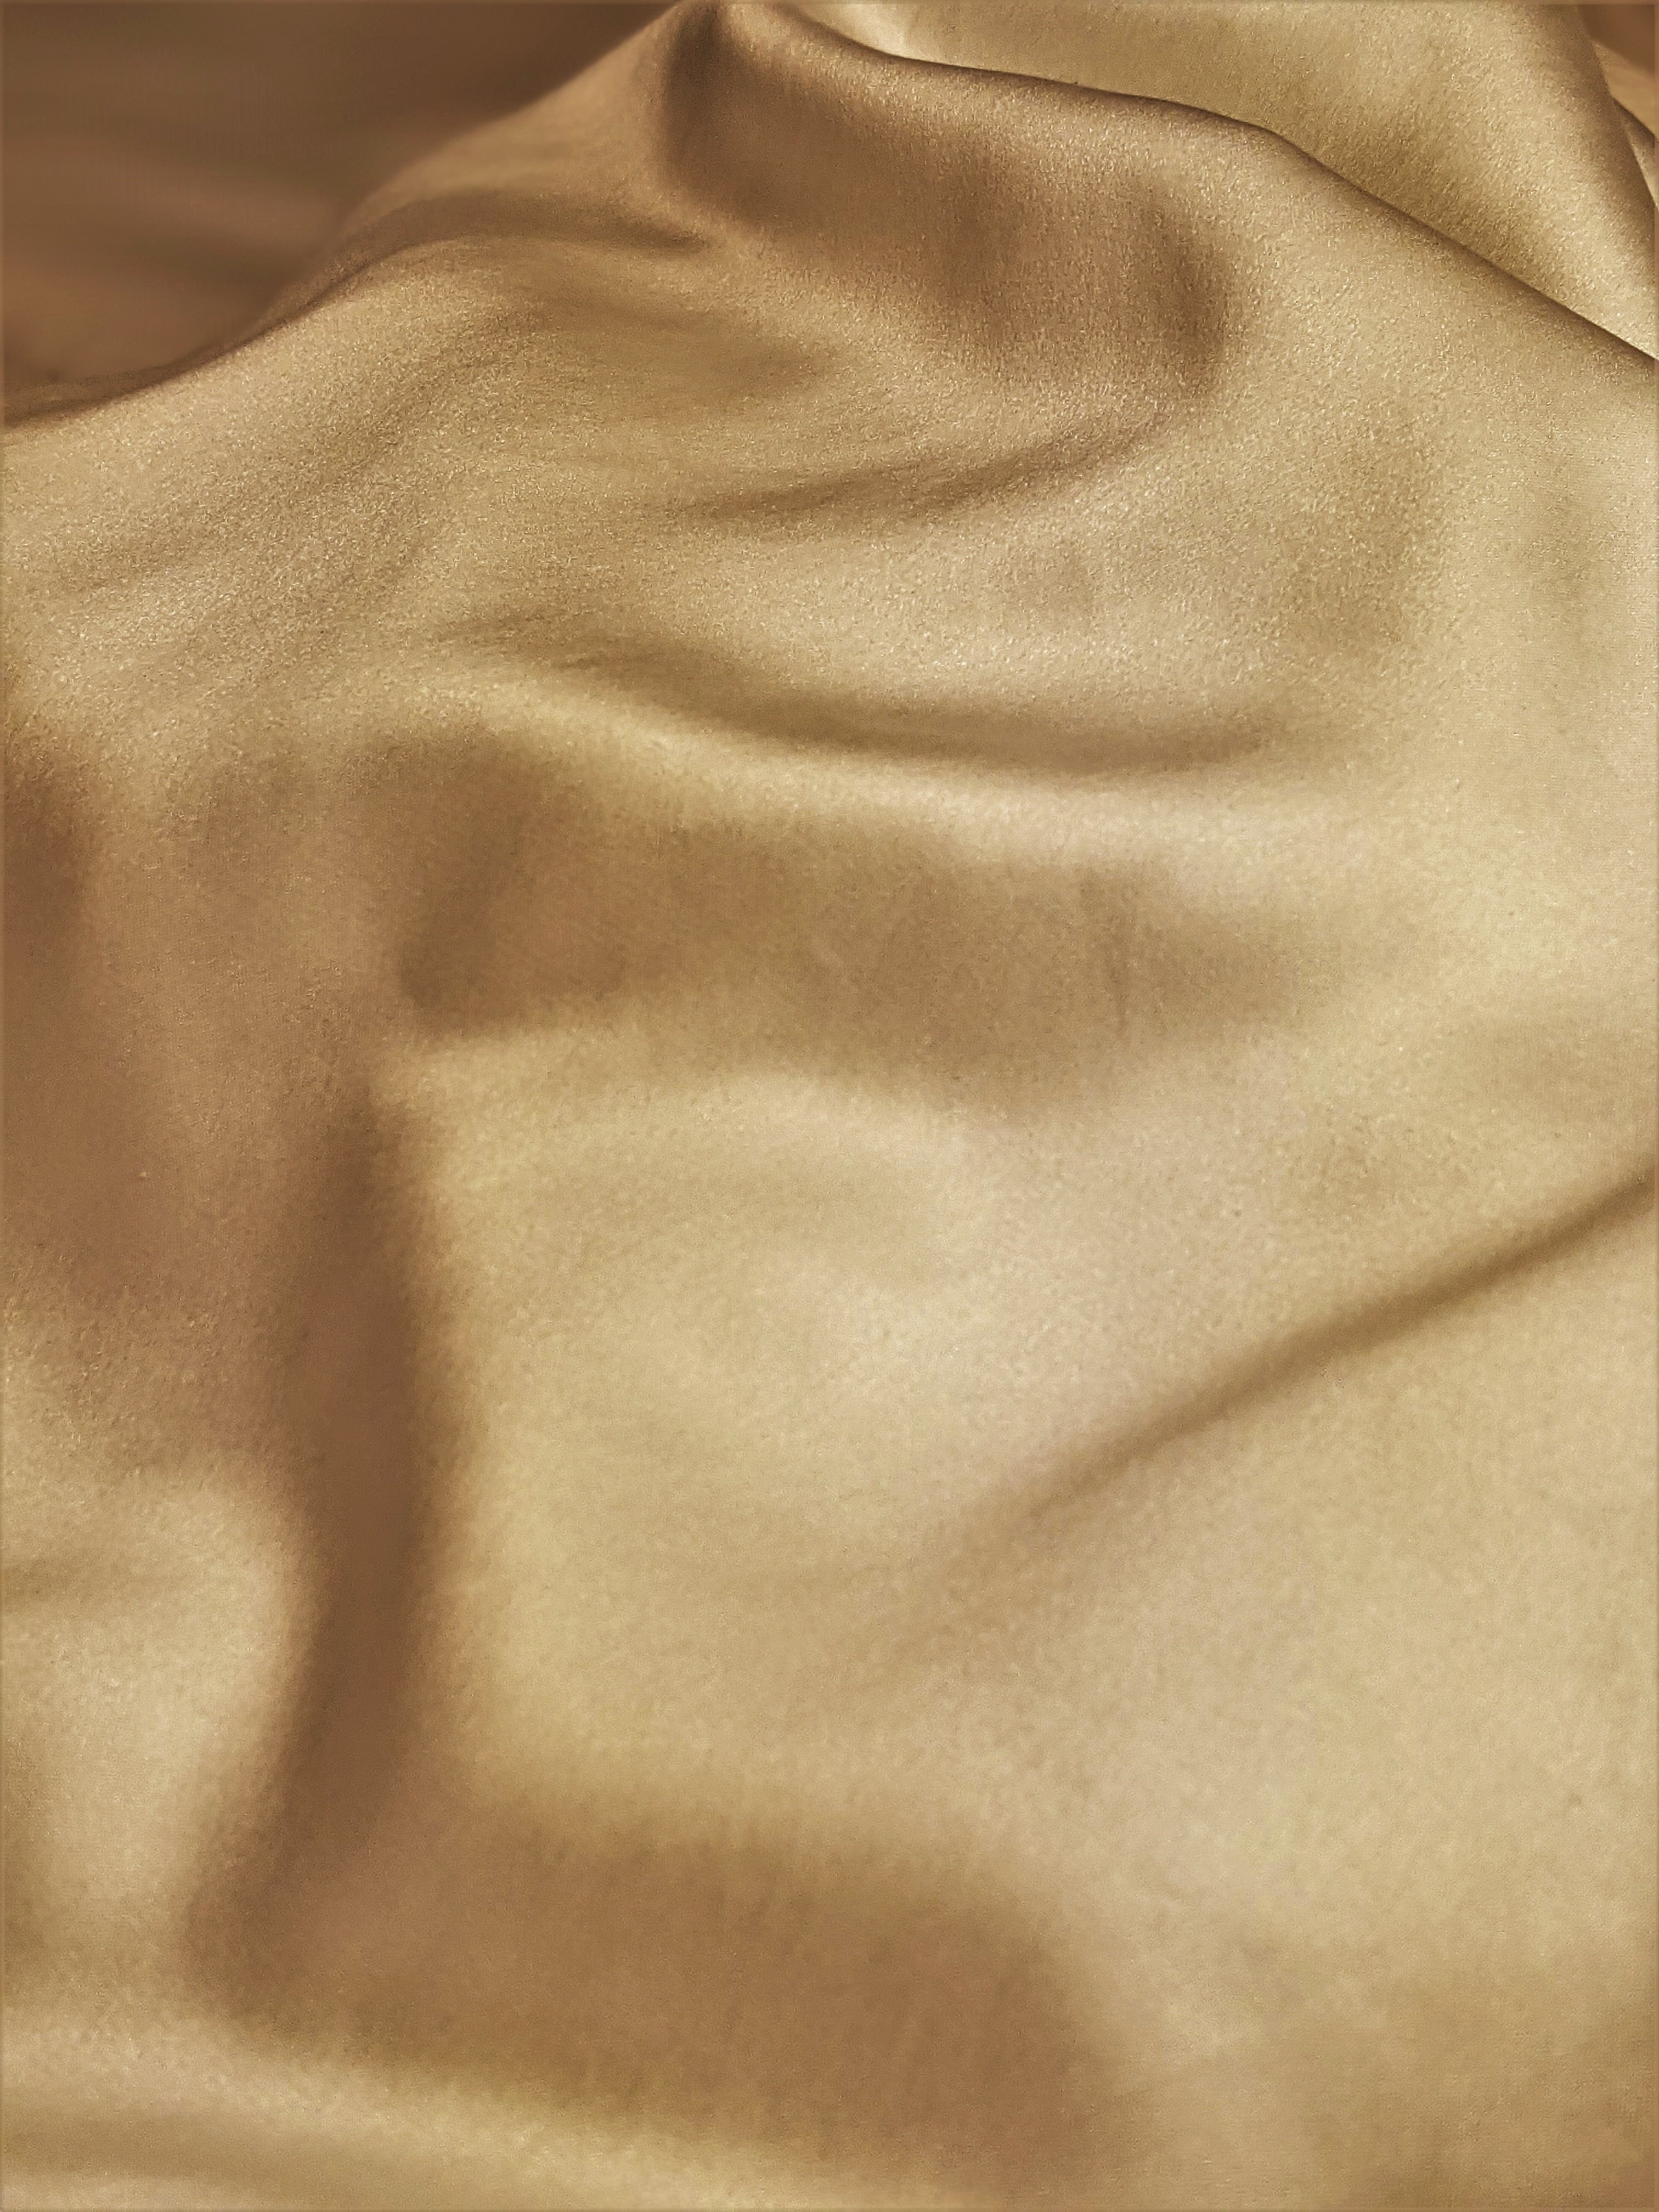 Wallpaper for mobile devices texture, pleating, textures, cloth